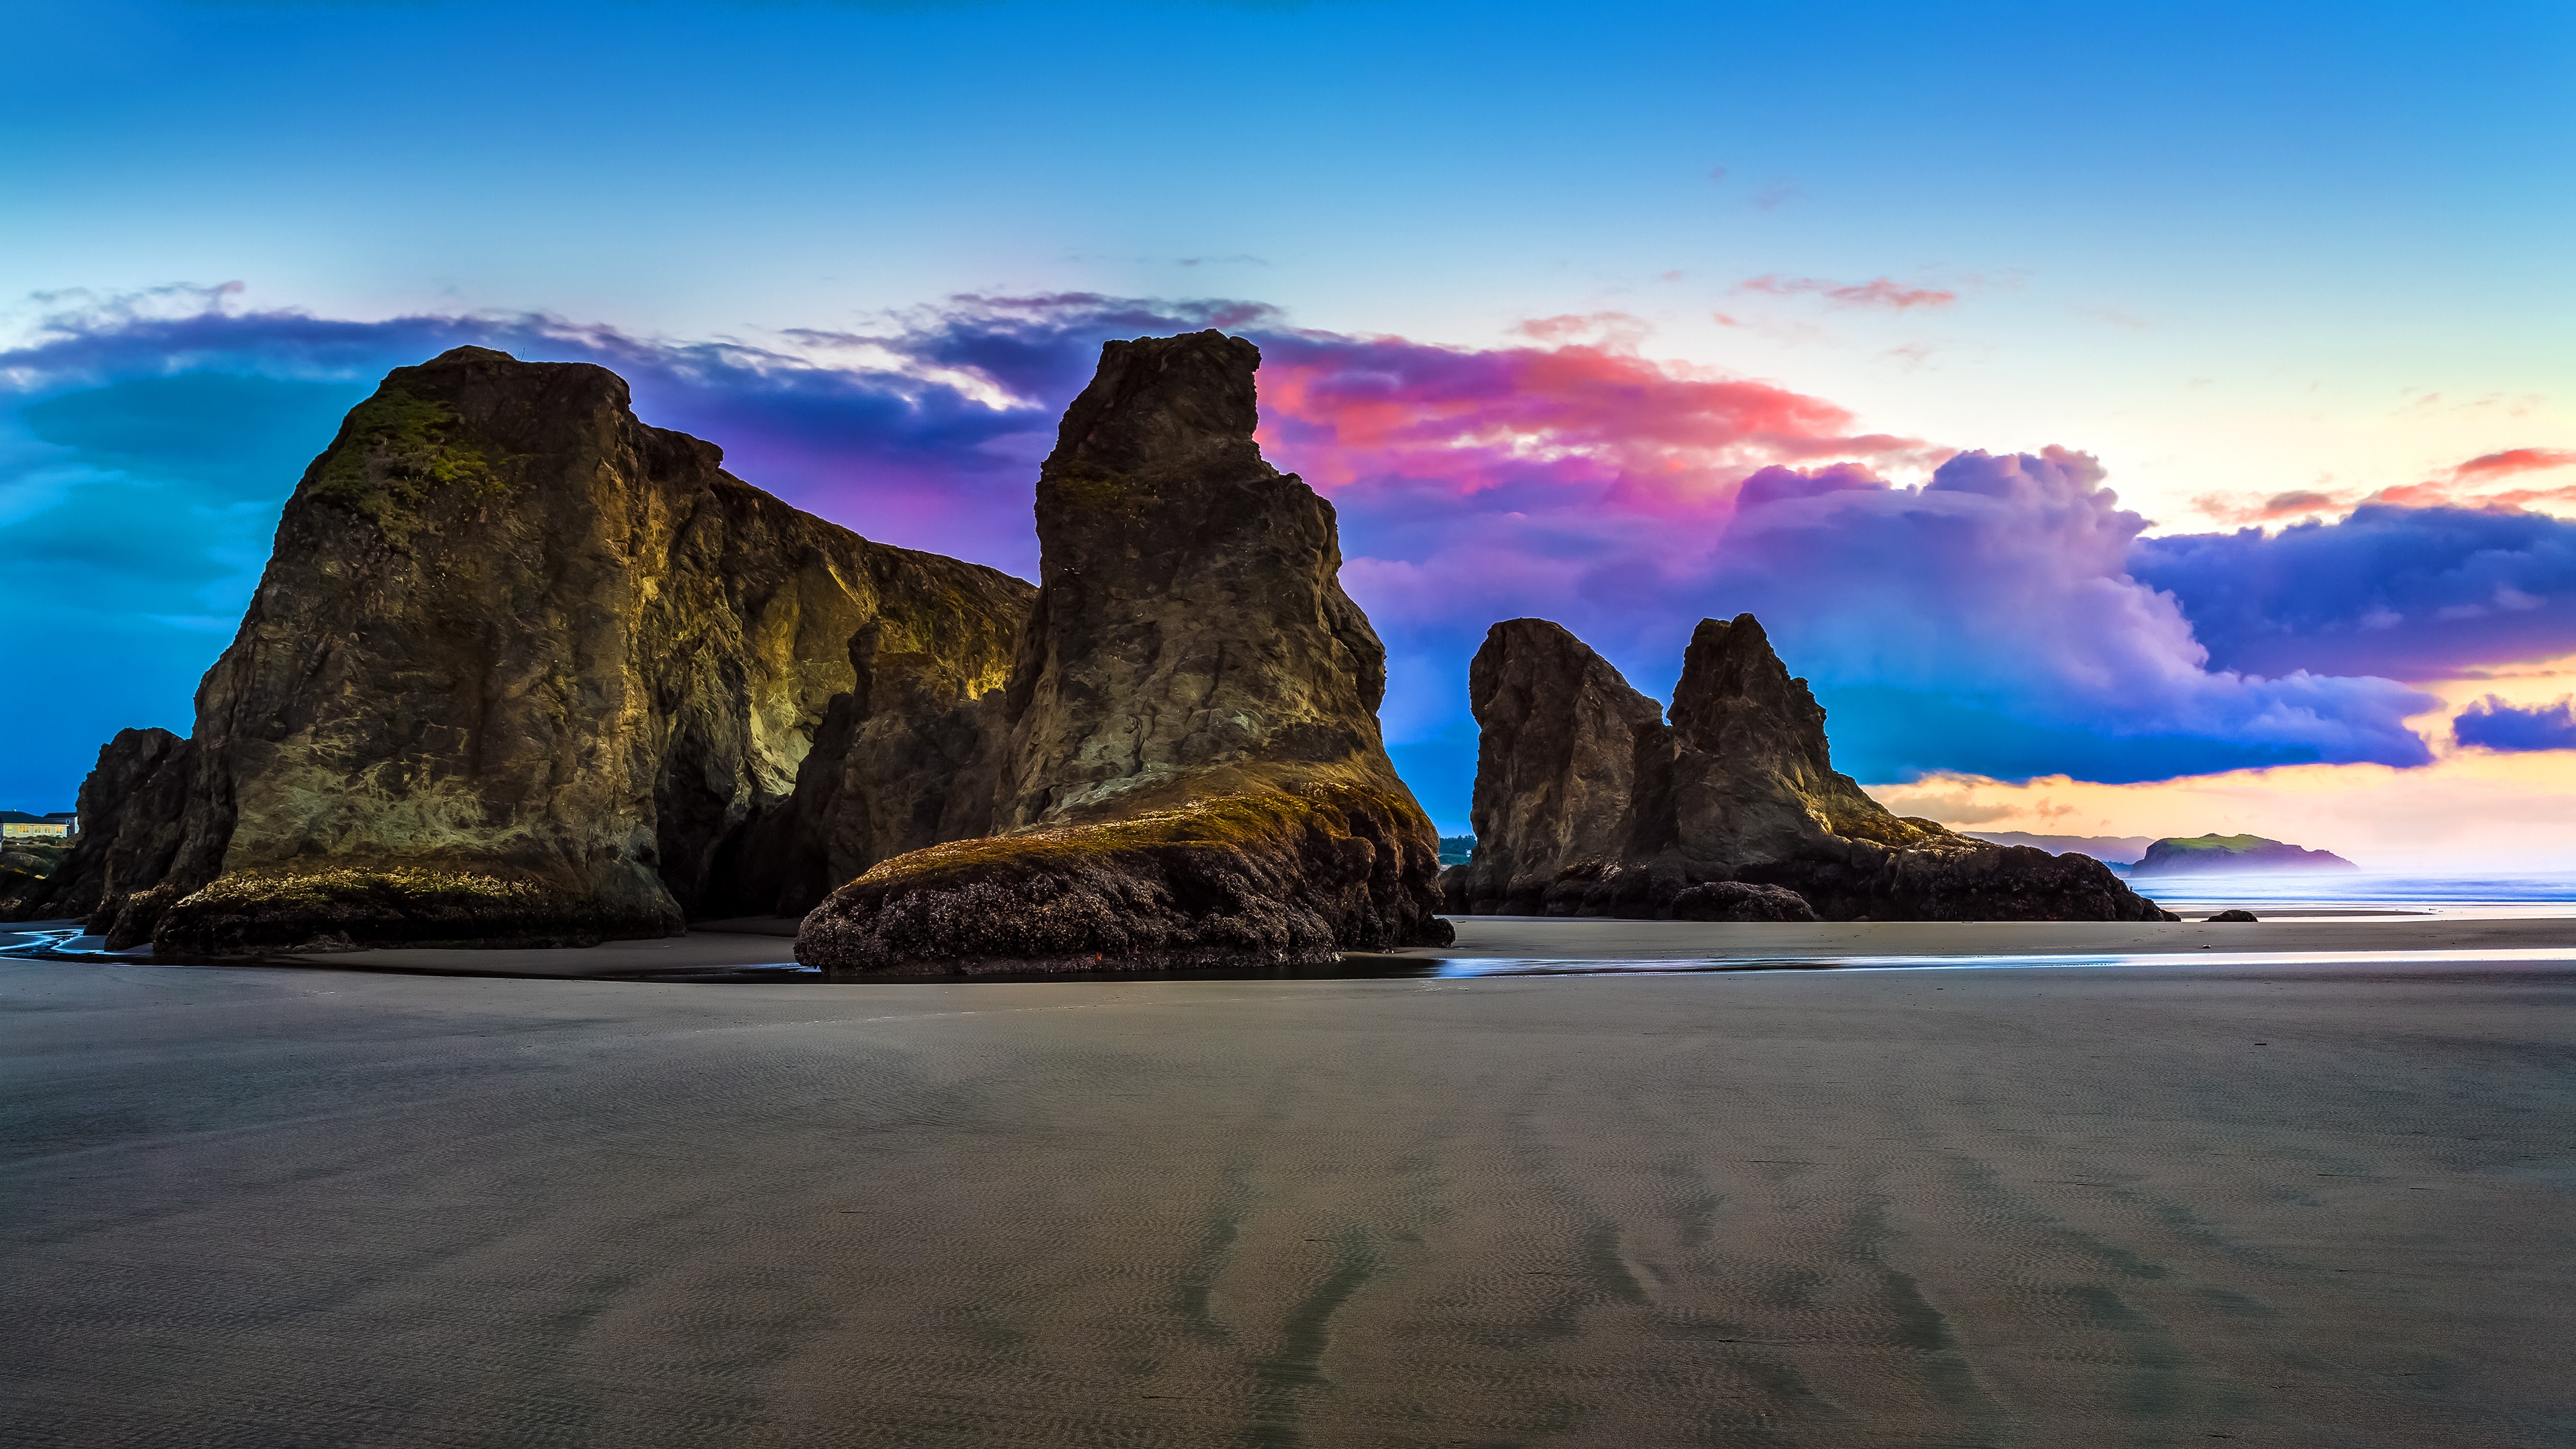 Bandon By the Sea for 3840 x 2160 Ultra HD resolution